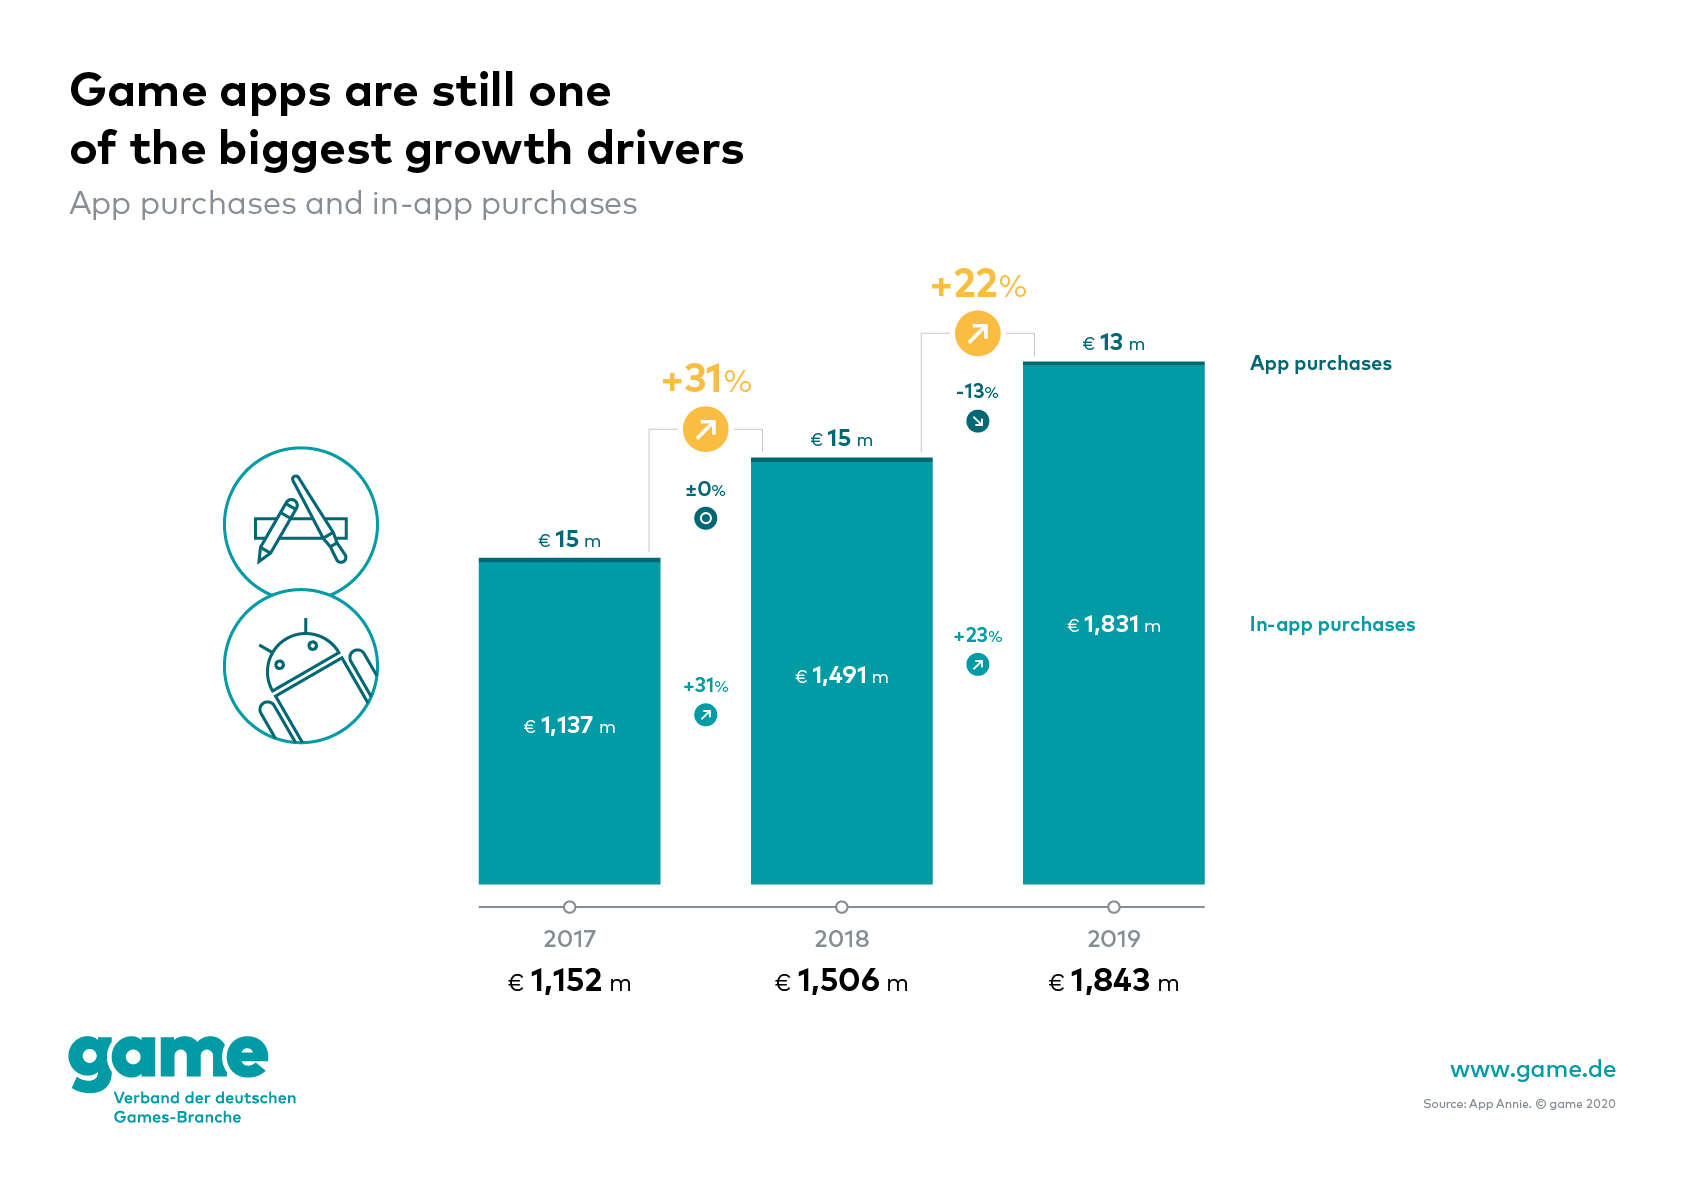 Game apps are one of the biggest growth drivers in 2019